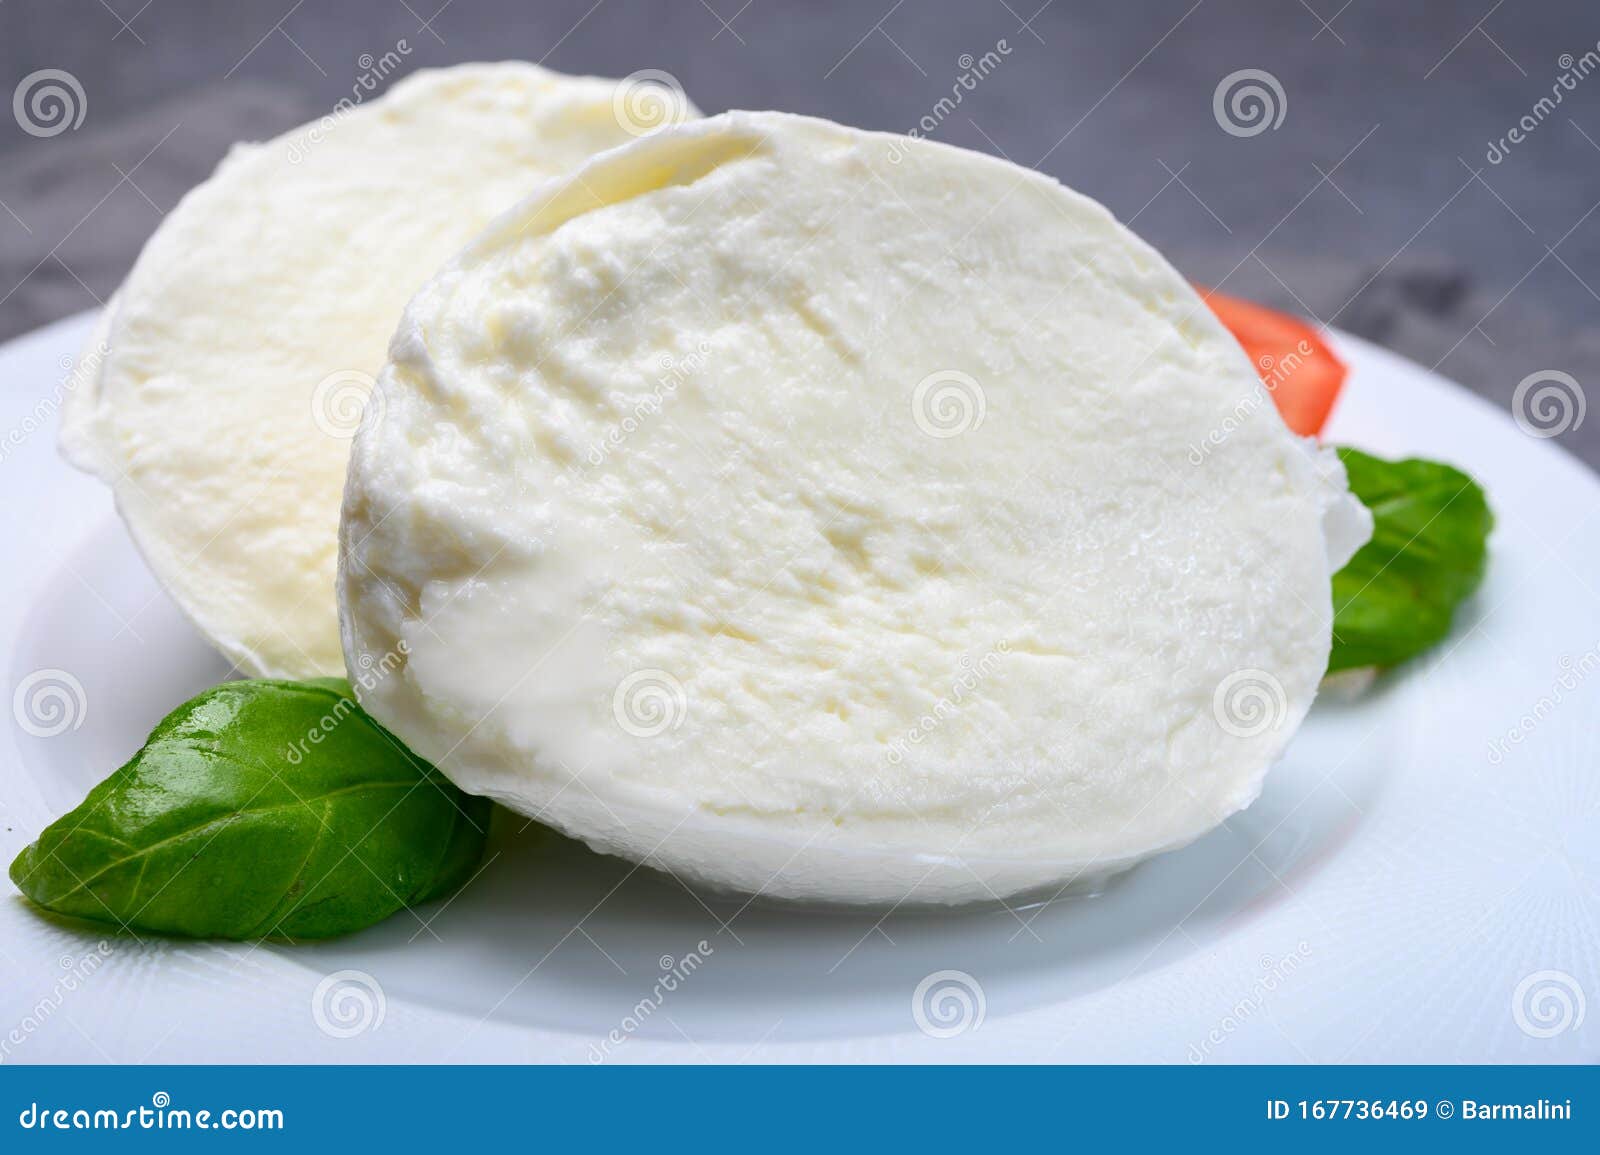 cheese collection, soft white italian mozzarella di bufala campana with fresh green basil leaves and red tomatoes